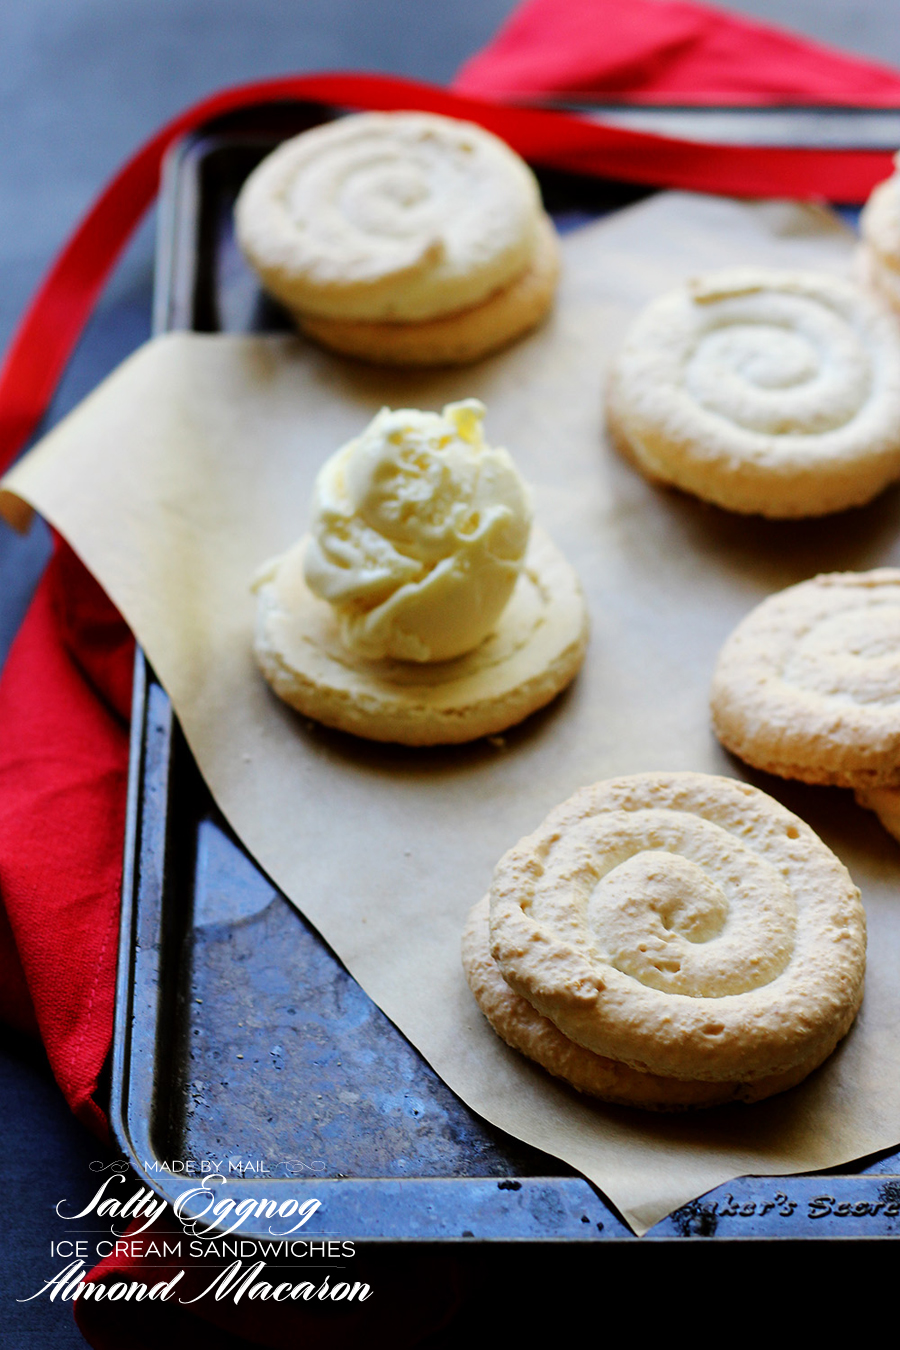 Made By Mail | Sarah Coates | Salty Egg Nog Ice Cream Sandwiches | Dine X Design